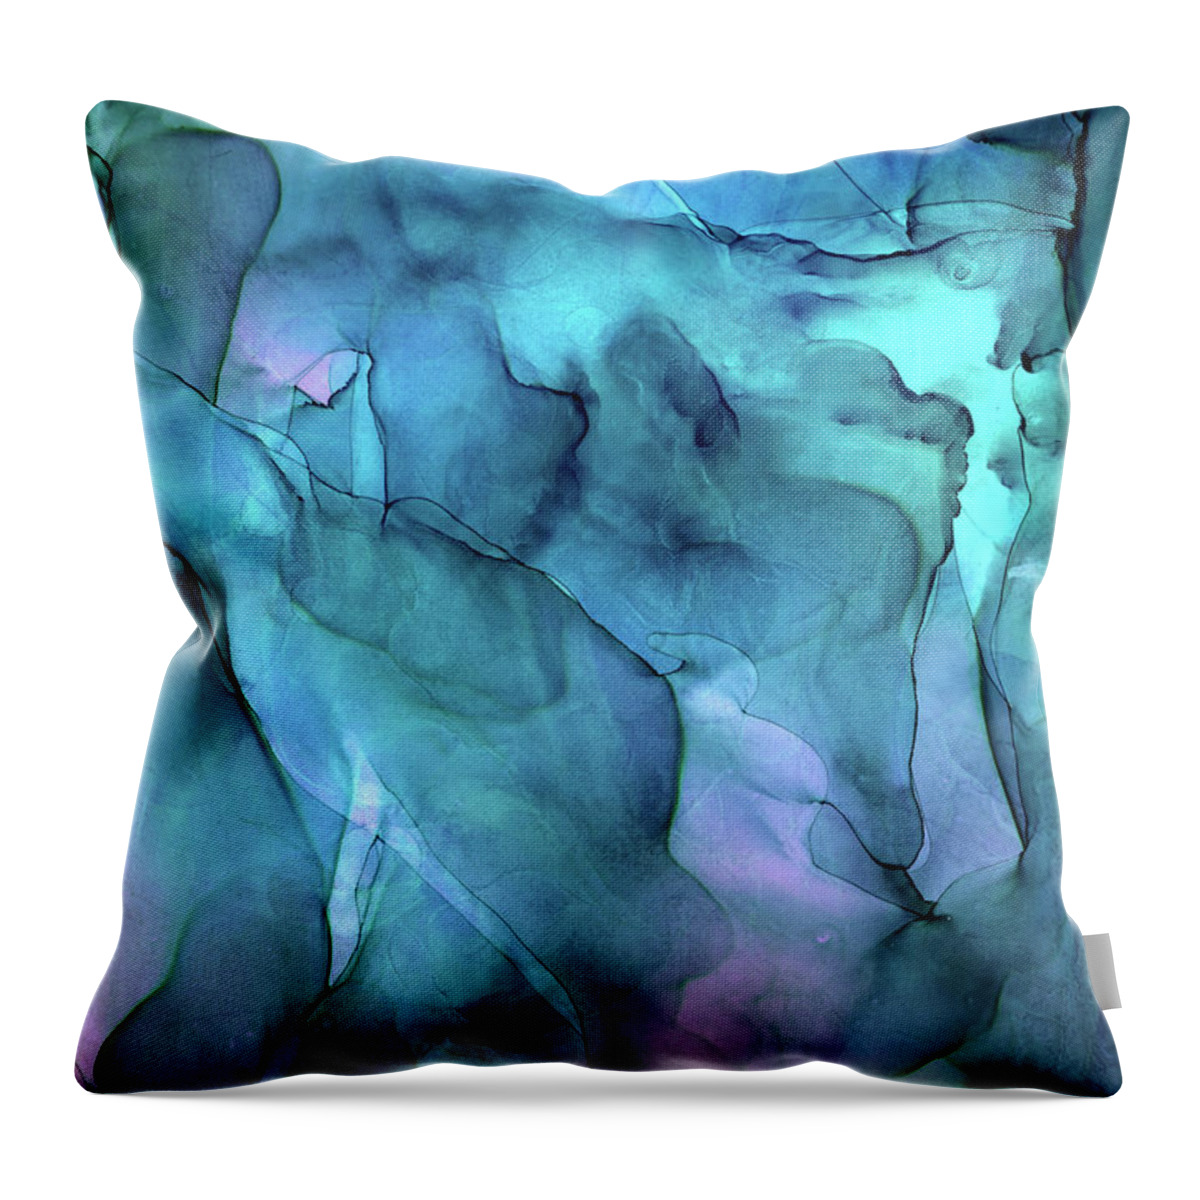 Turquoise Throw Pillow featuring the painting Turquoise Blue Ink by Olga Shvartsur